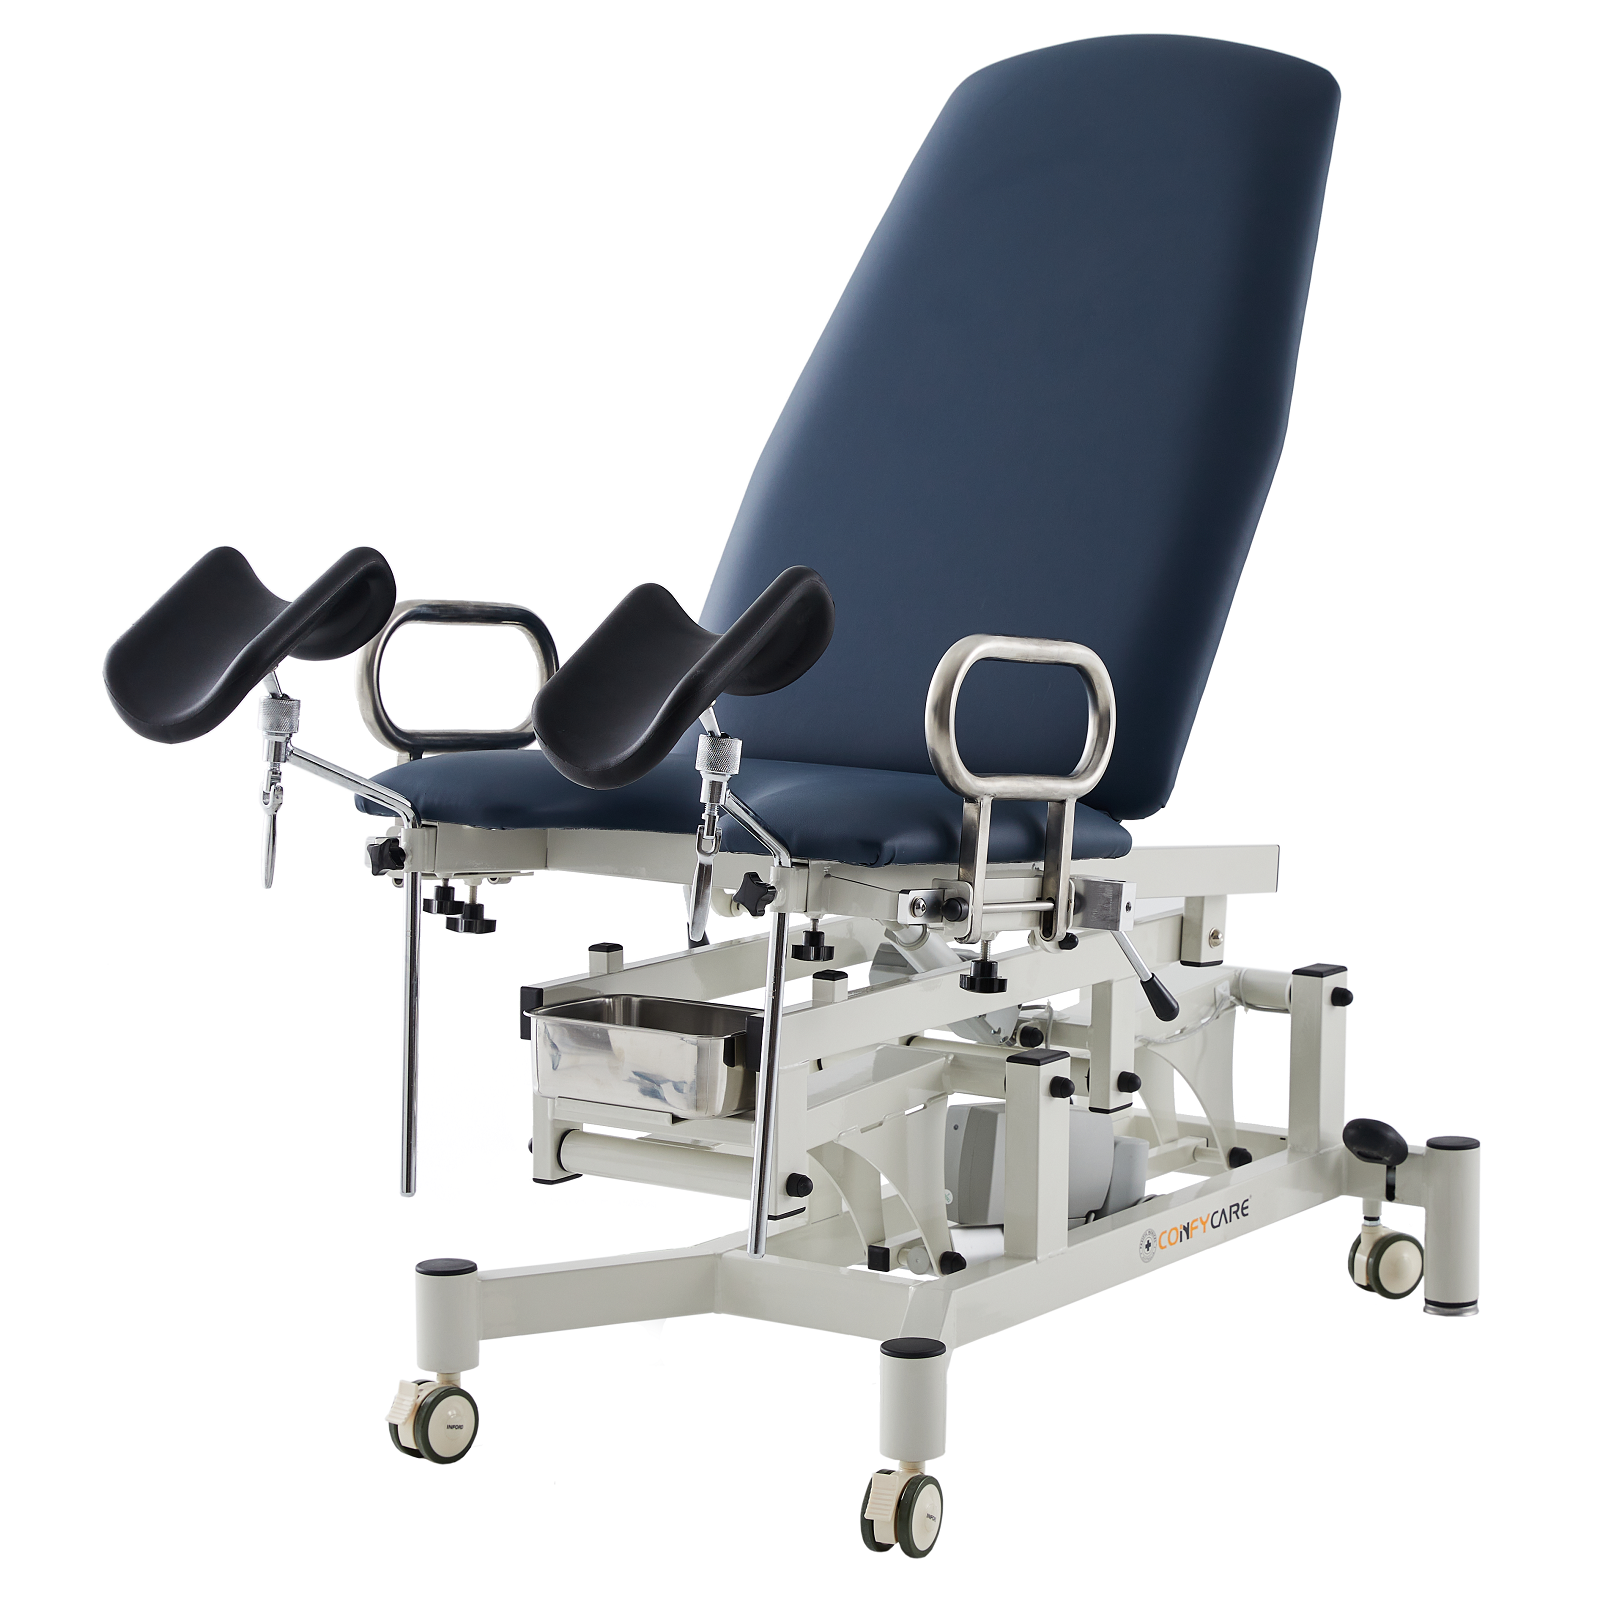 Gynaecology Treatment Couch